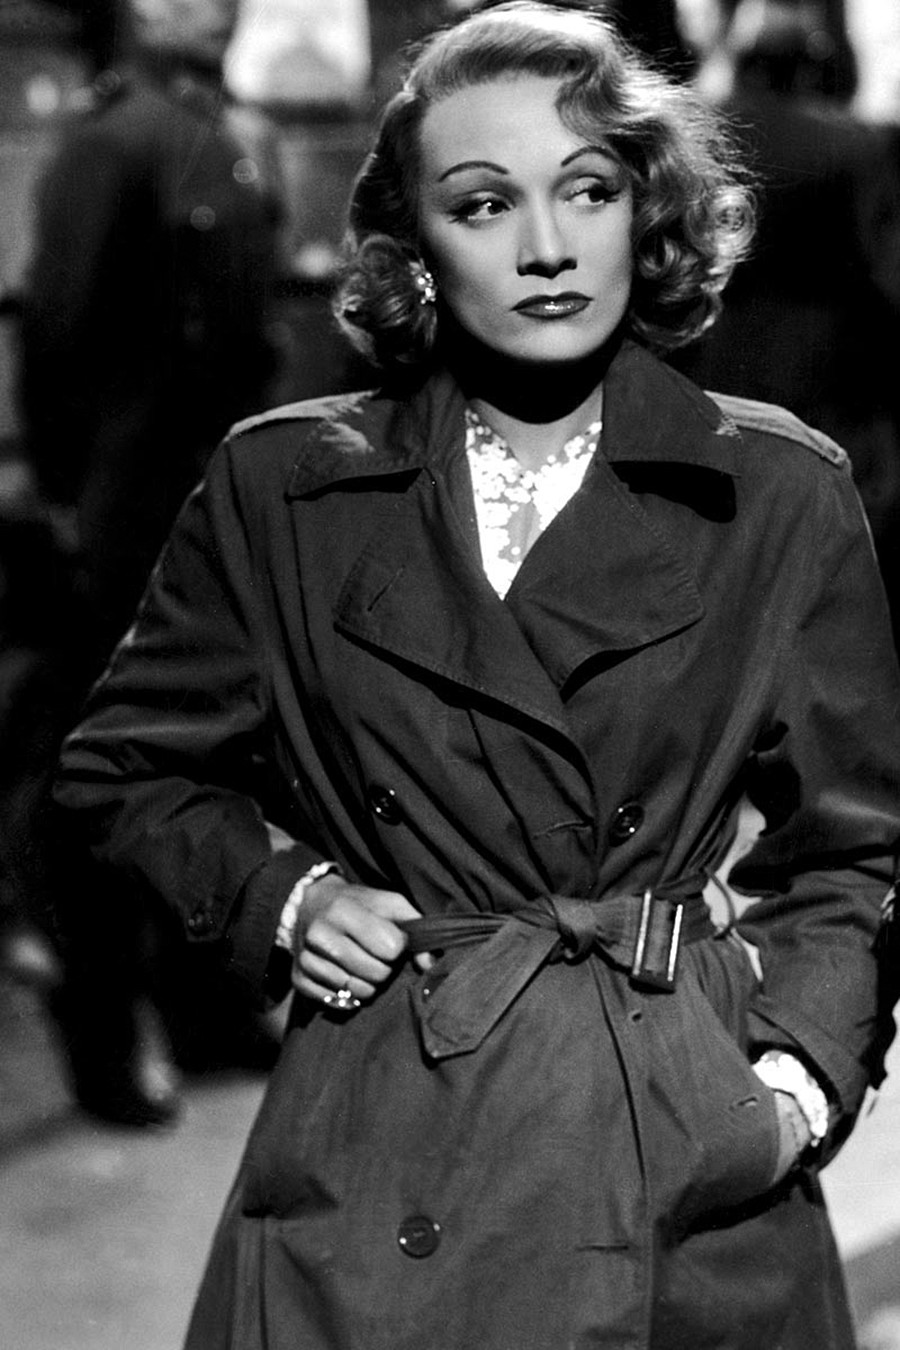 Marlene Dietrich wearing a trench coat in A Foreign Affair.